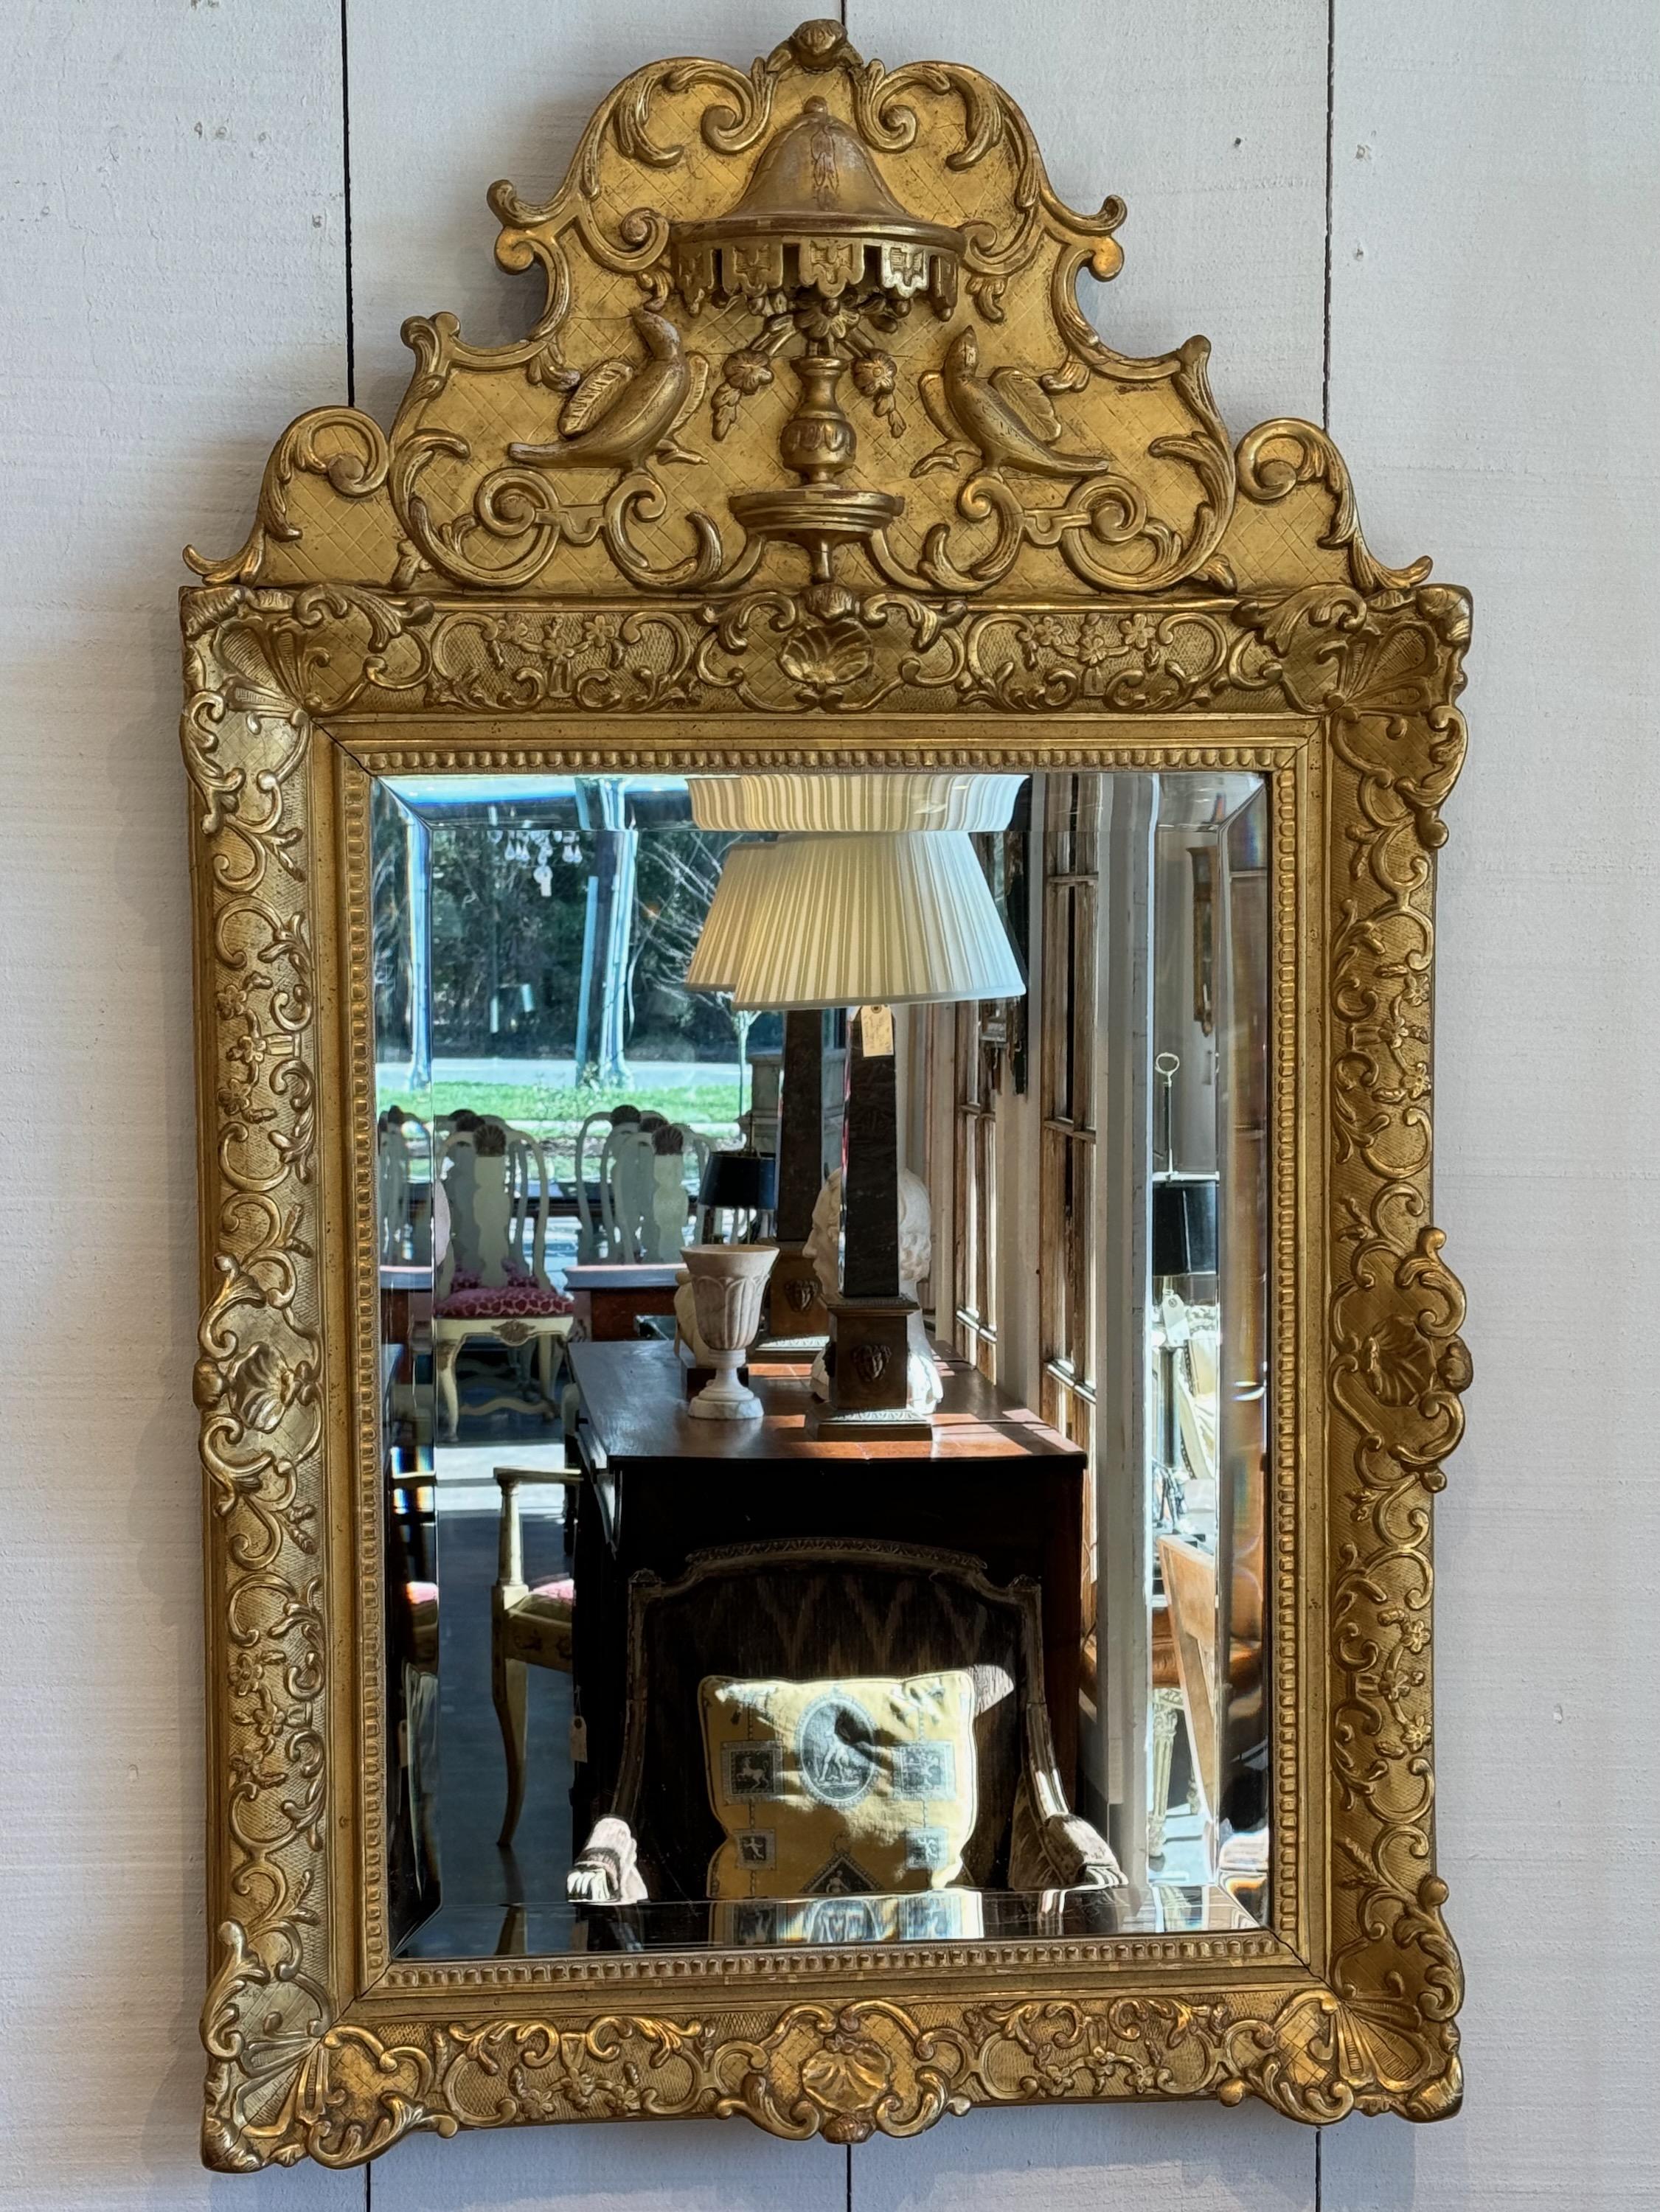 Look at this exquisite gilded mirror. Featuring birds.